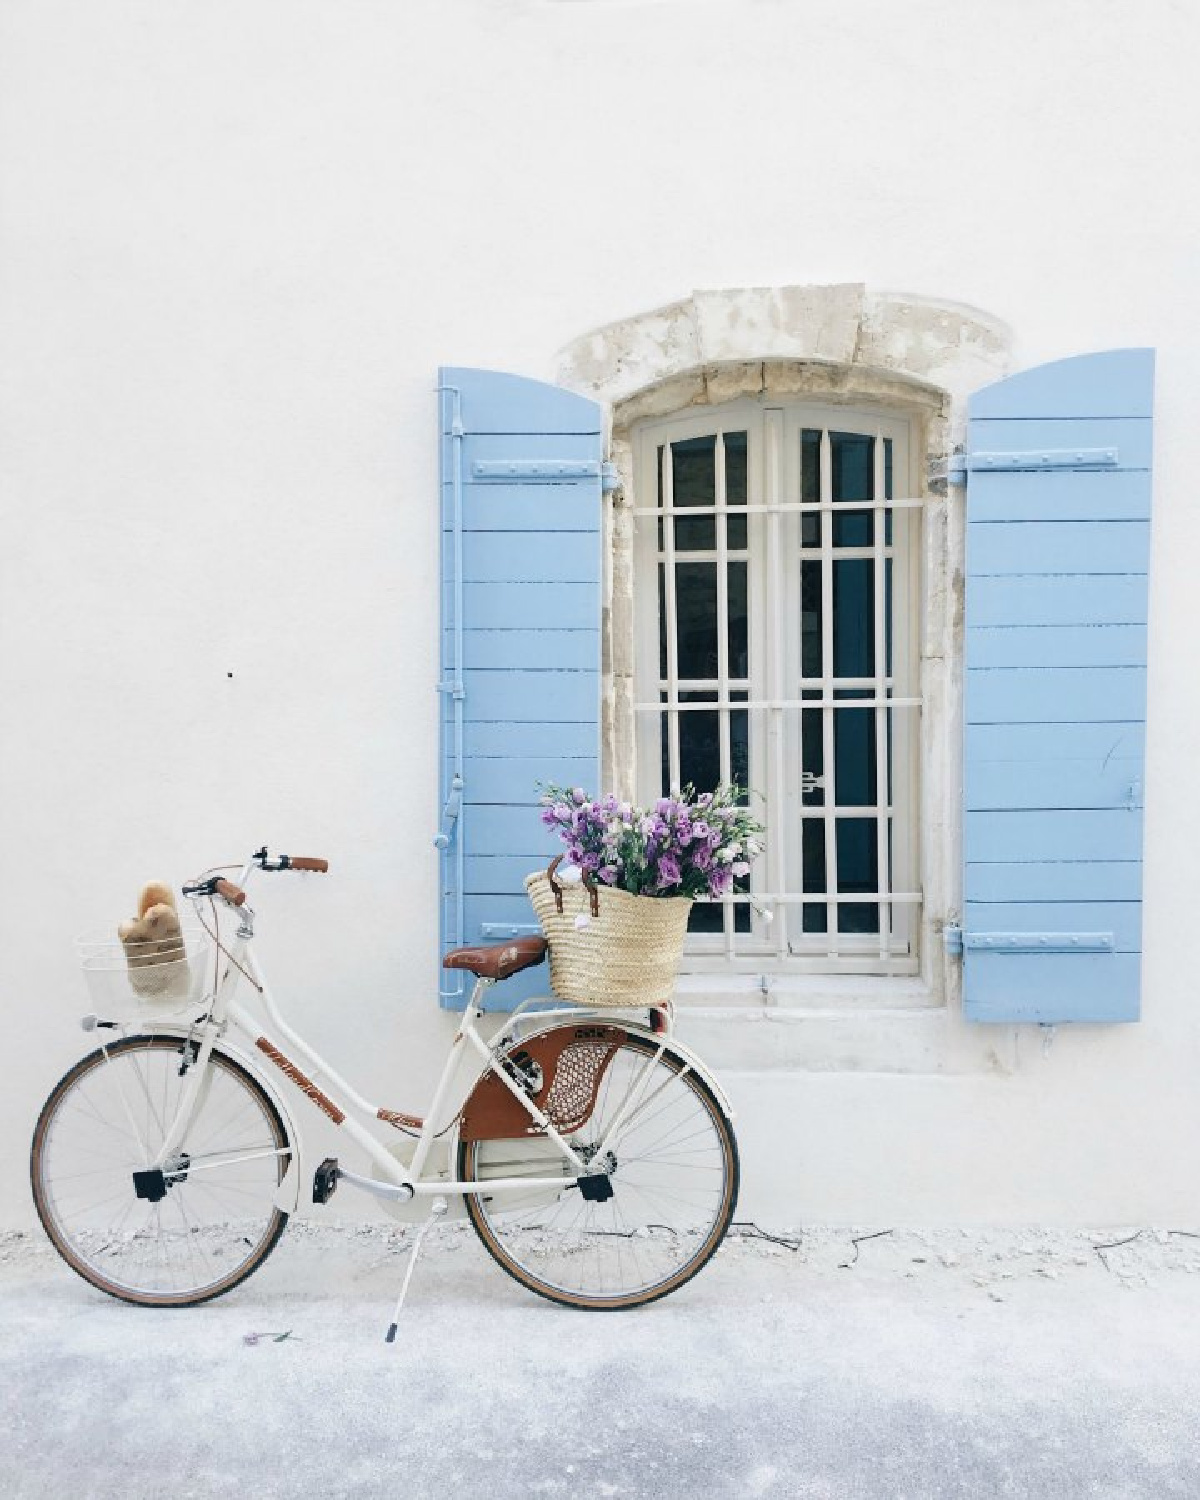 Charming French country vignette with white bicycle, French market basket of flowers, bright blue shutters, and a crisp white house exterior. Romantic indeed! #provencestyle #romanticfrance